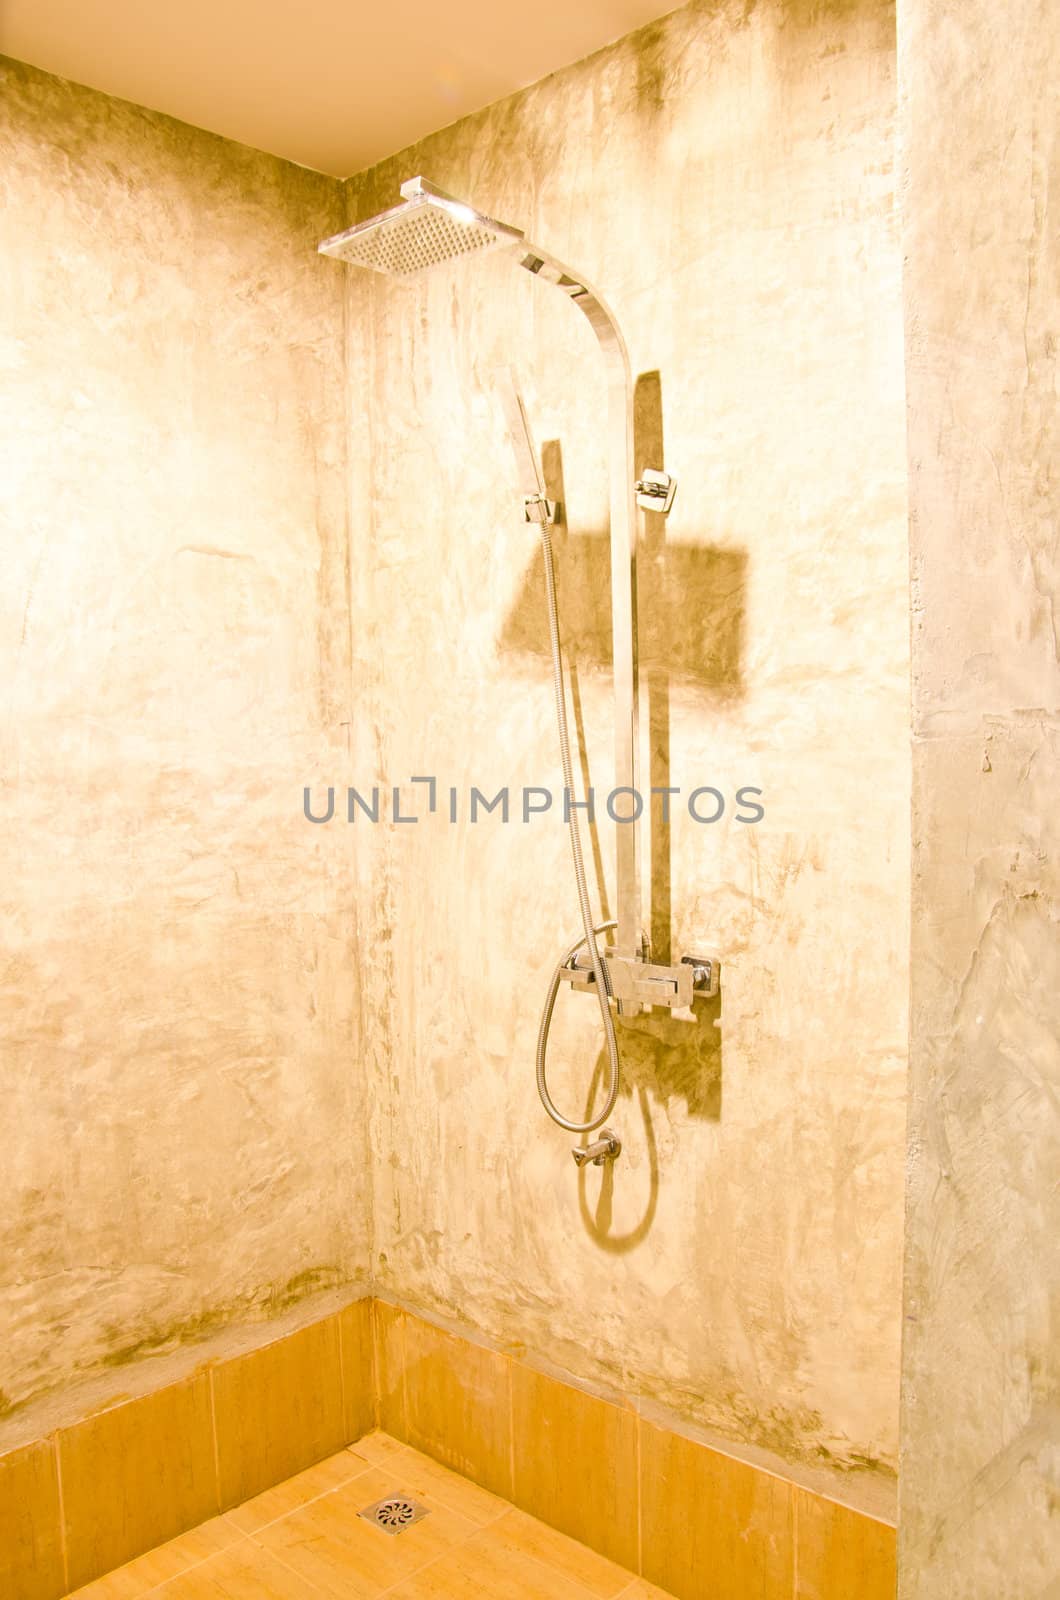 Shower in bathroom with polished concrete walls. Home interiors.